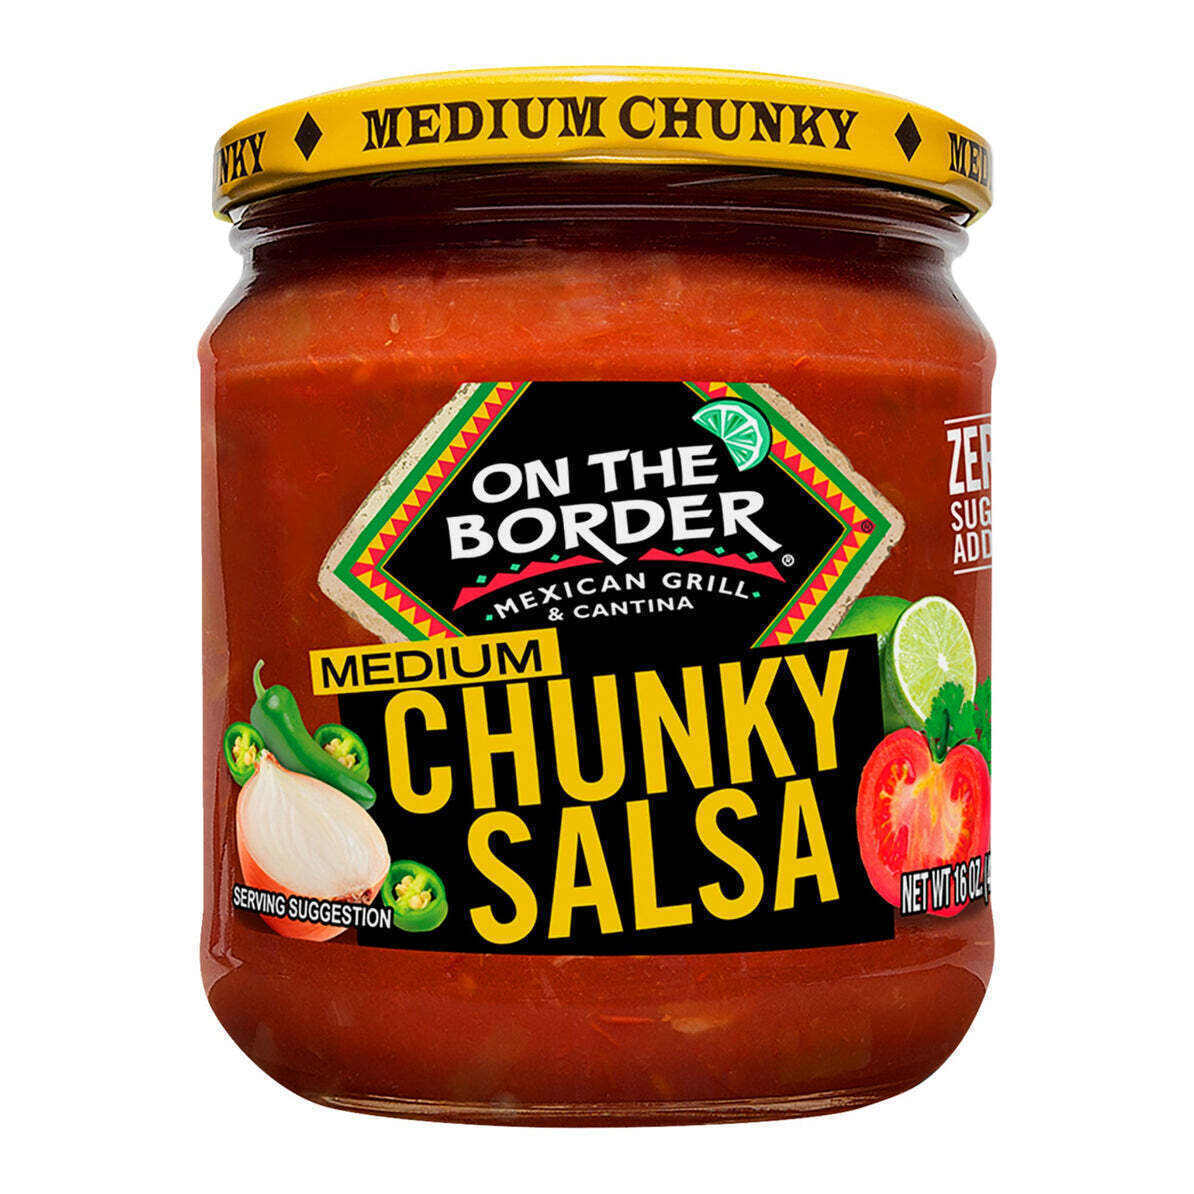 On The Border Mexican Grill & Cantina Chunky Salsa, 2-Pack 16 oz. Jars - $27.95